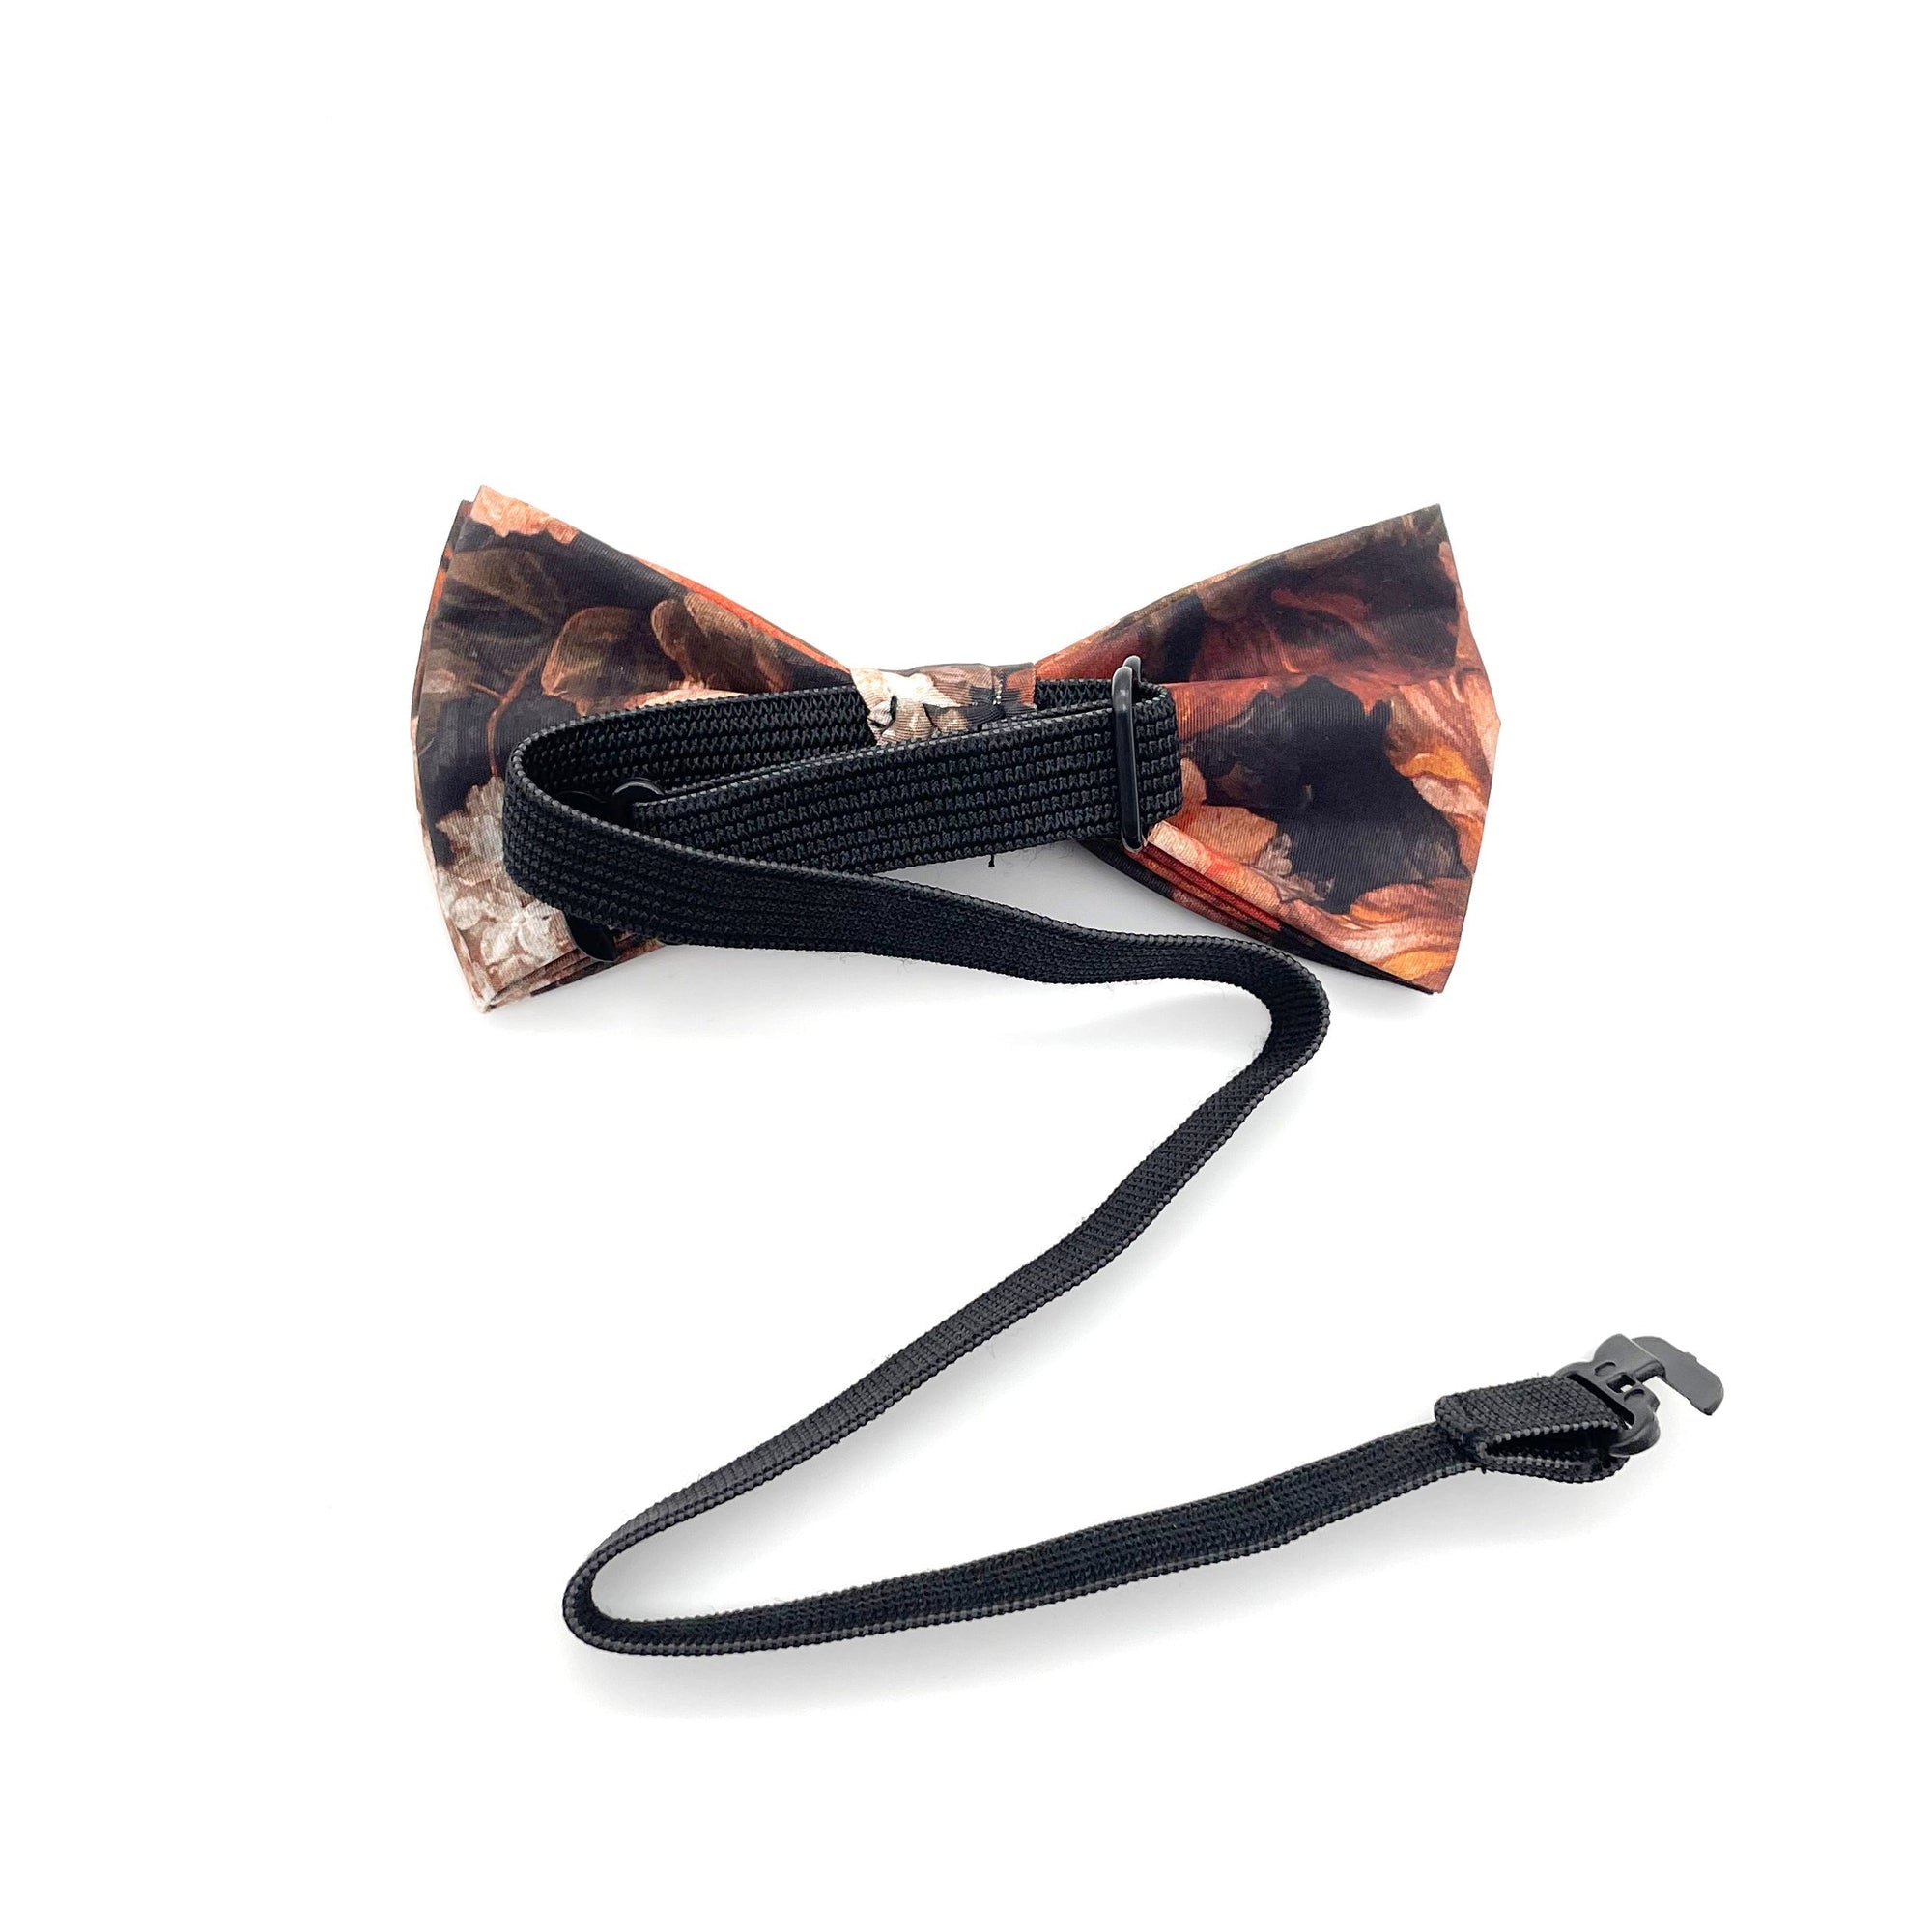 Kids Floral Bow Tie Pre-Tied THEOPHILUS-Kids Floral Bow Tie Pre-Tied Color: Black Base Strap is adjustablePre-Tied bowtieBow Tie 10.5 * 6CM Great for Ring Bearer Photo shoots Photo sessions Wedding Attendant Fits toddlers and babies. Theophilus infant baby bow tie toddler bow tie floral for wedding and events groom groomsmen flower bow tie mytieshop ring bearer page boy bow tie white bow tie white and blue tie kids bowtie floral Adjustable wedding attire for toddler and children floral print tie